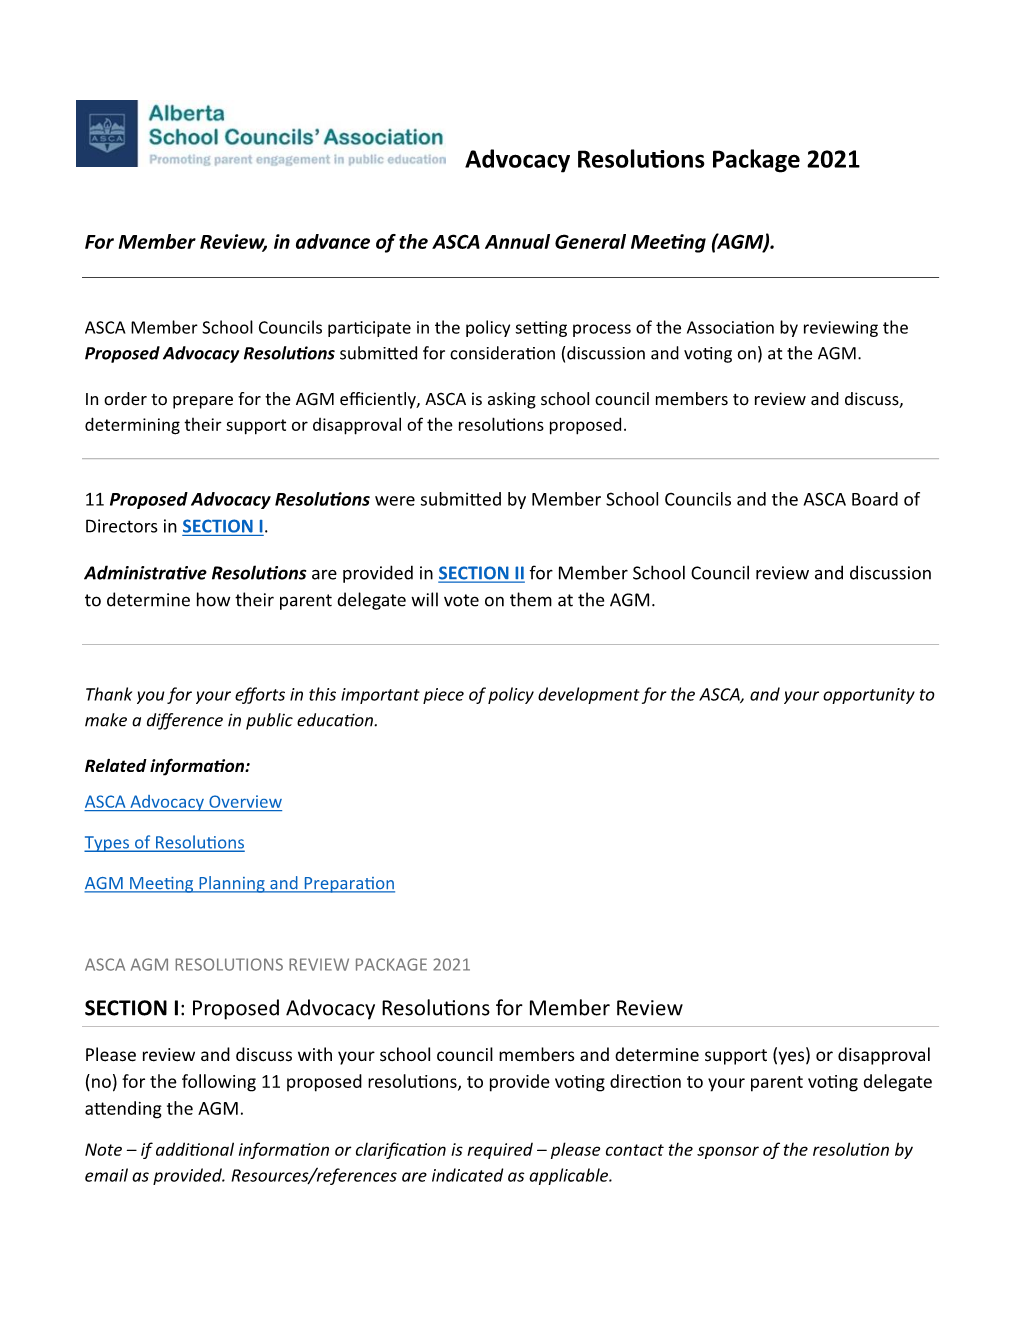 Advocacy Resolutions Review Package 2021 REVISED April 16